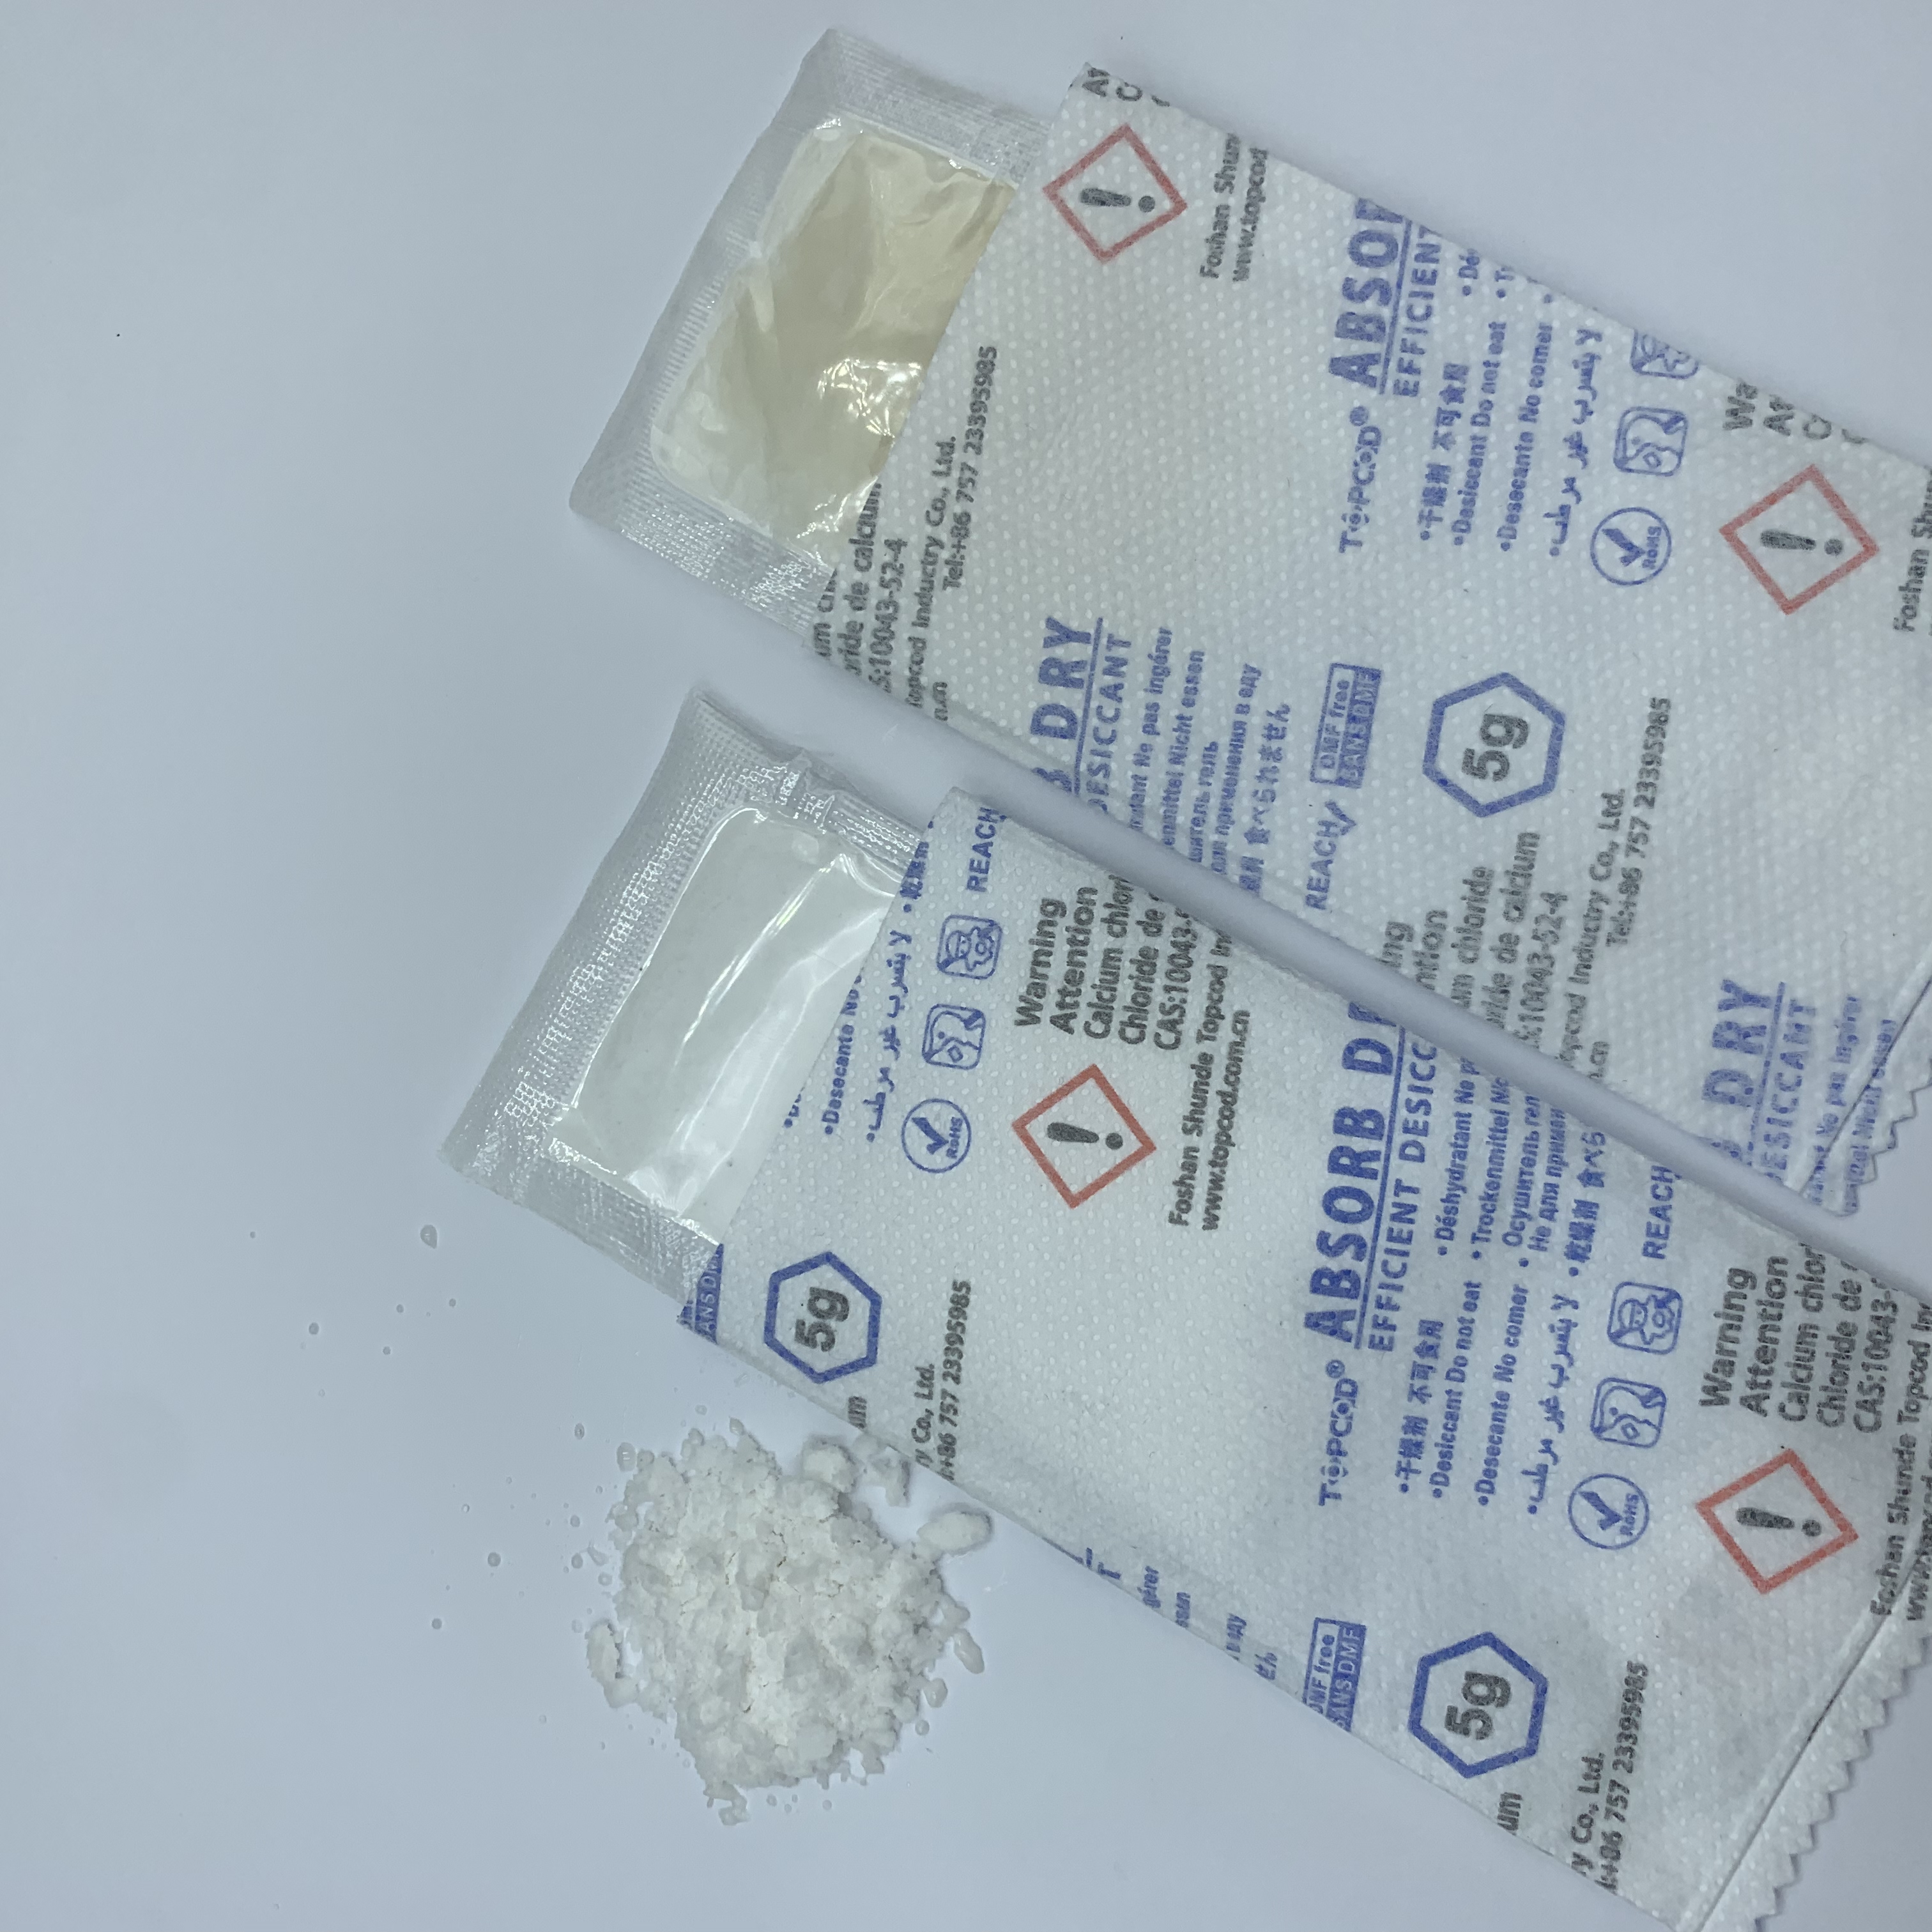 5g Solid Calcium Chloride Desiccant for Absorbing Moisture